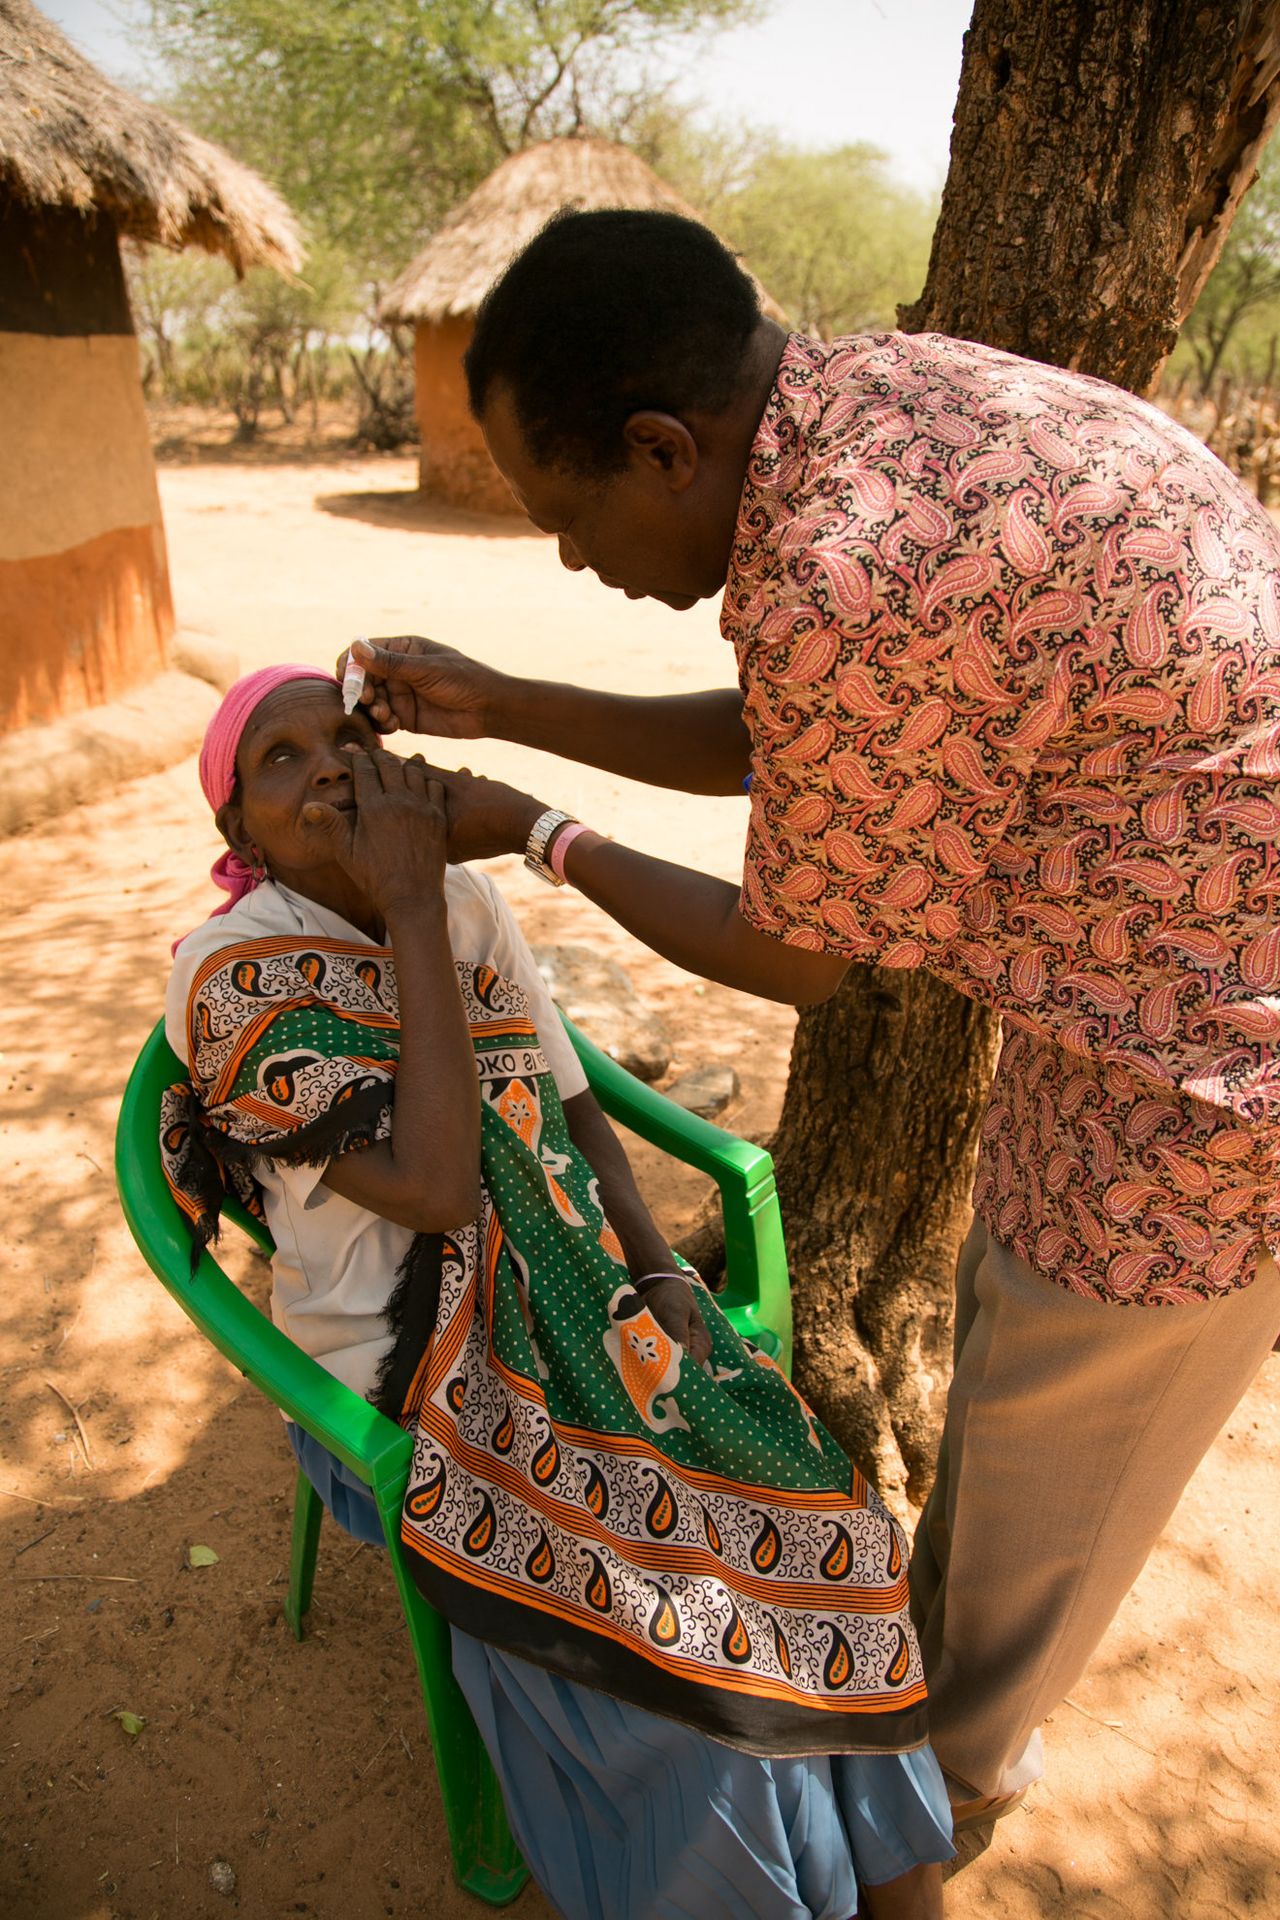 Dr. Michael Makari applies eyedrops to Chepserum’s eyes during a follow-up visit. Makari has performed basic surgeries on trachoma sufferers in this remote area of Kenya, helping people like Chepserum to see again.